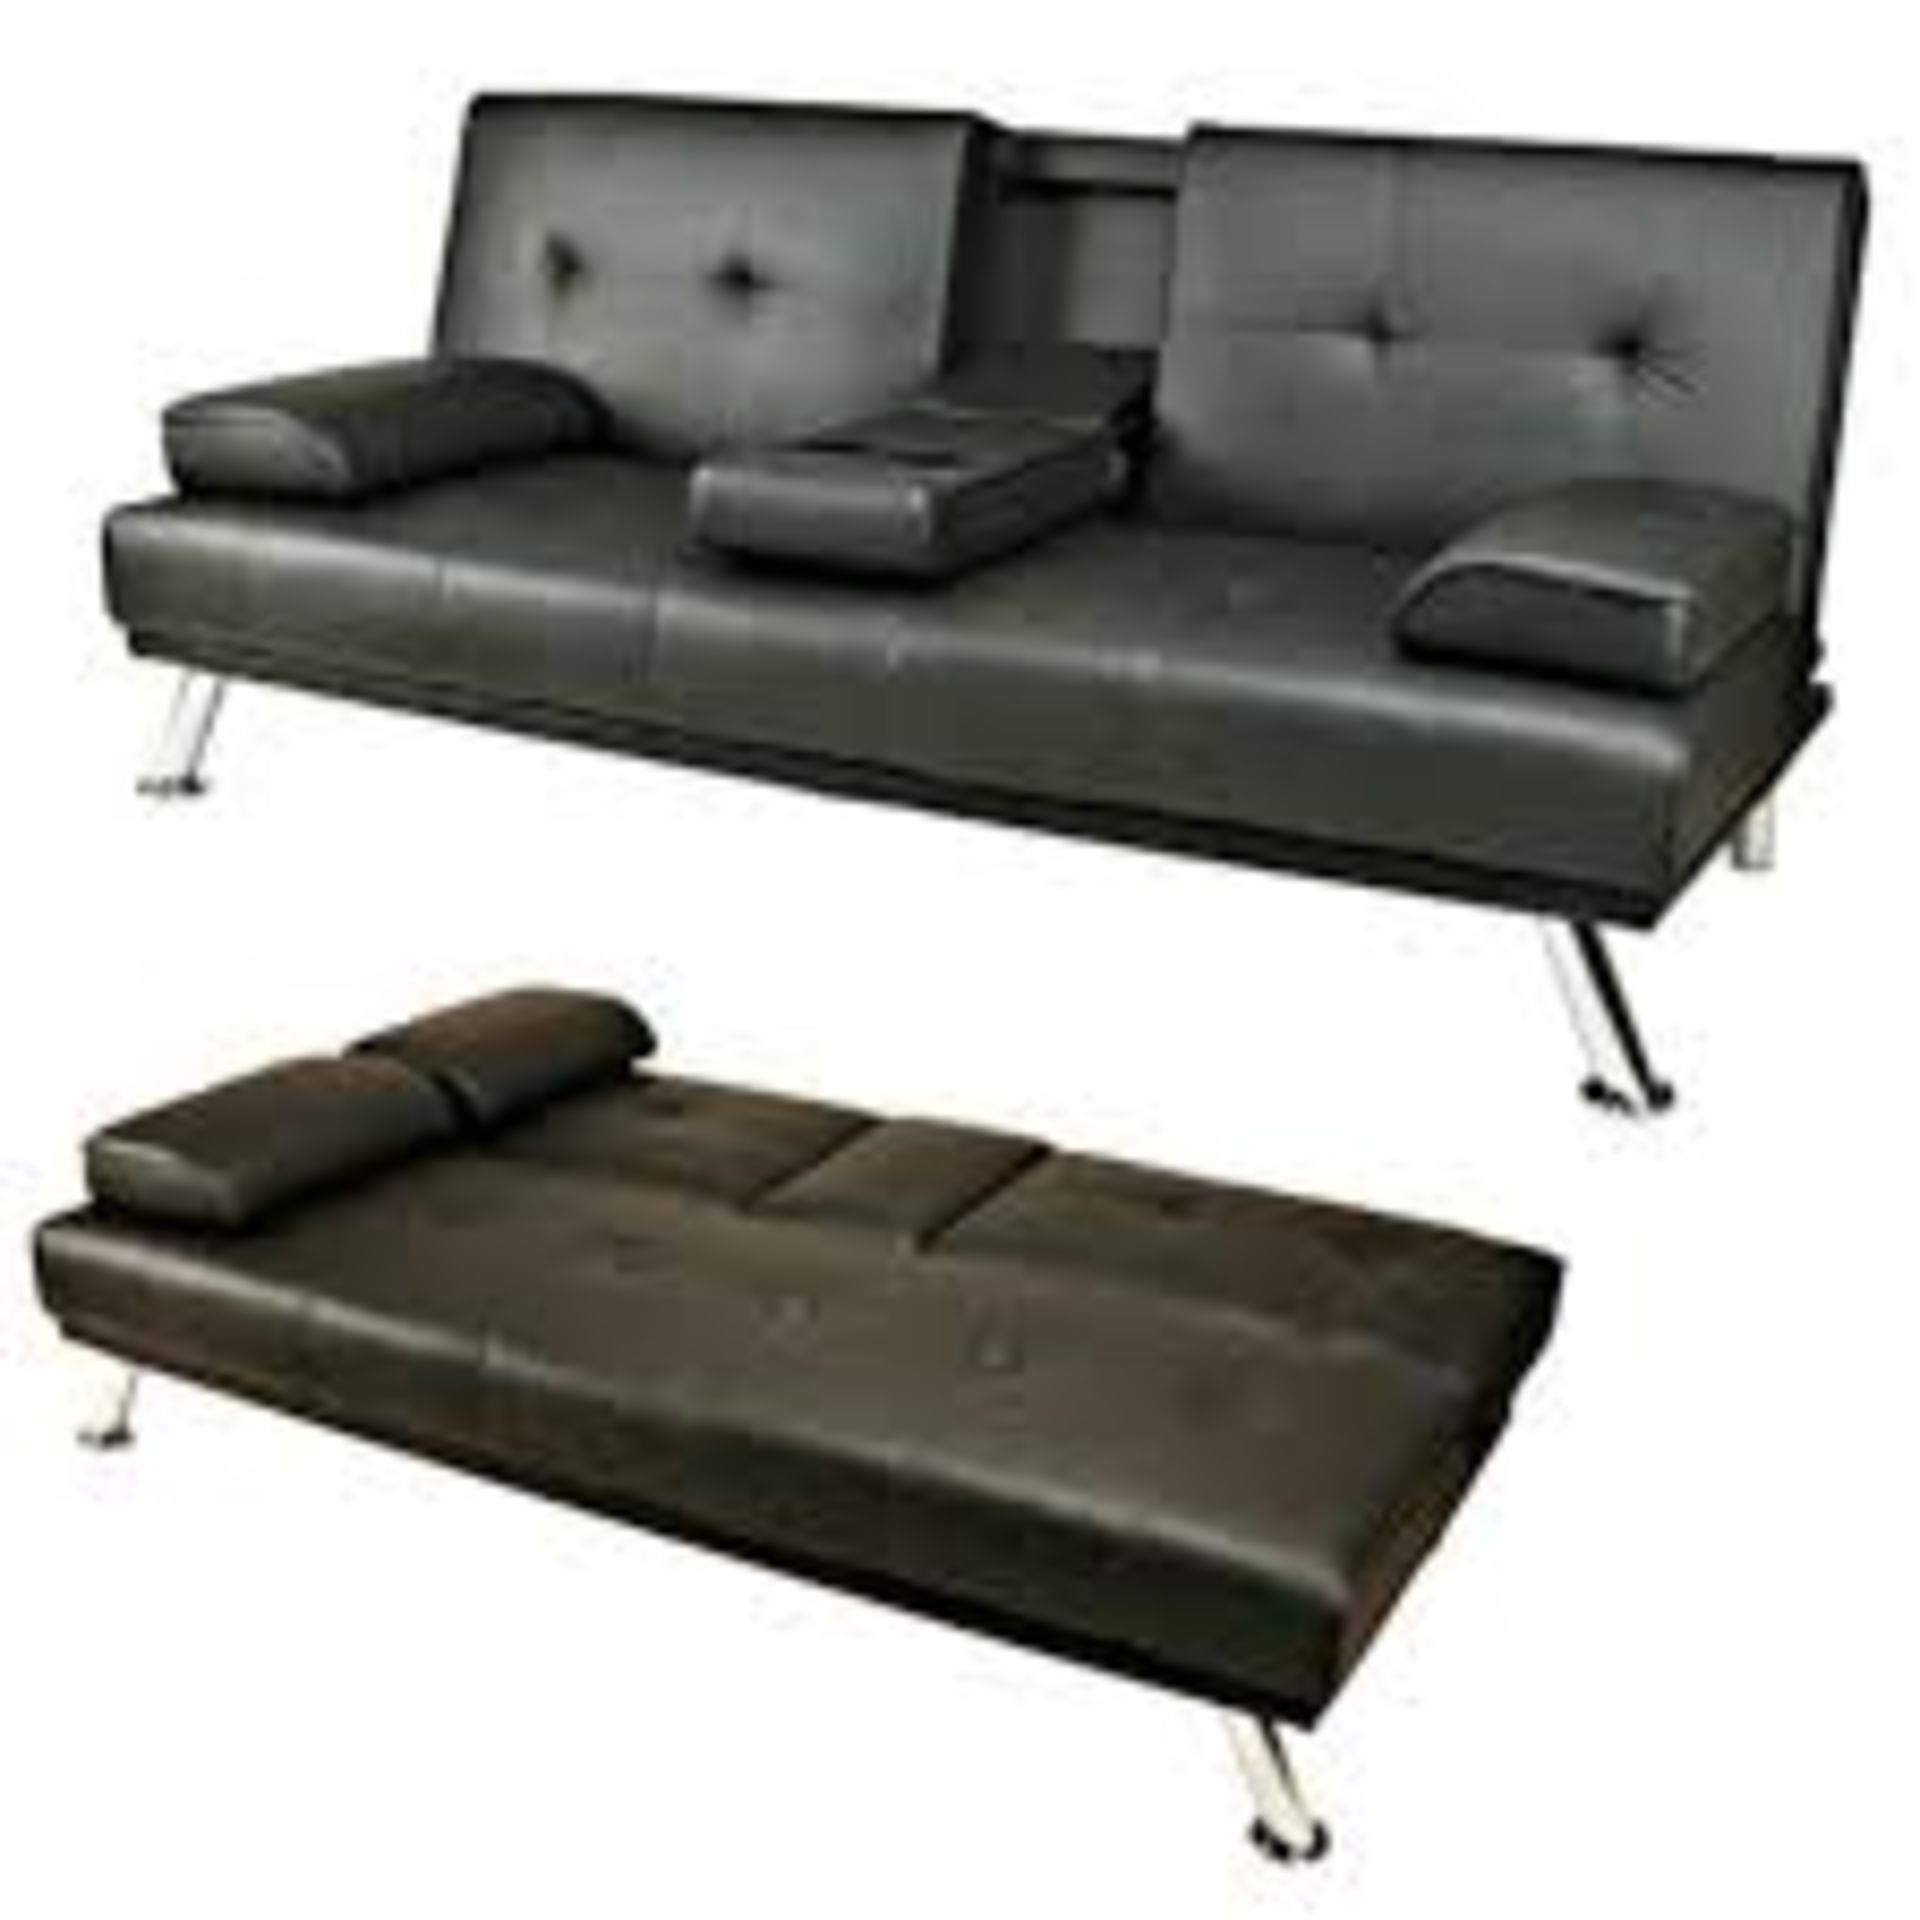 1 BRAND NEW BOXED COMO BLACK FAUX LEATHER SOFA BED